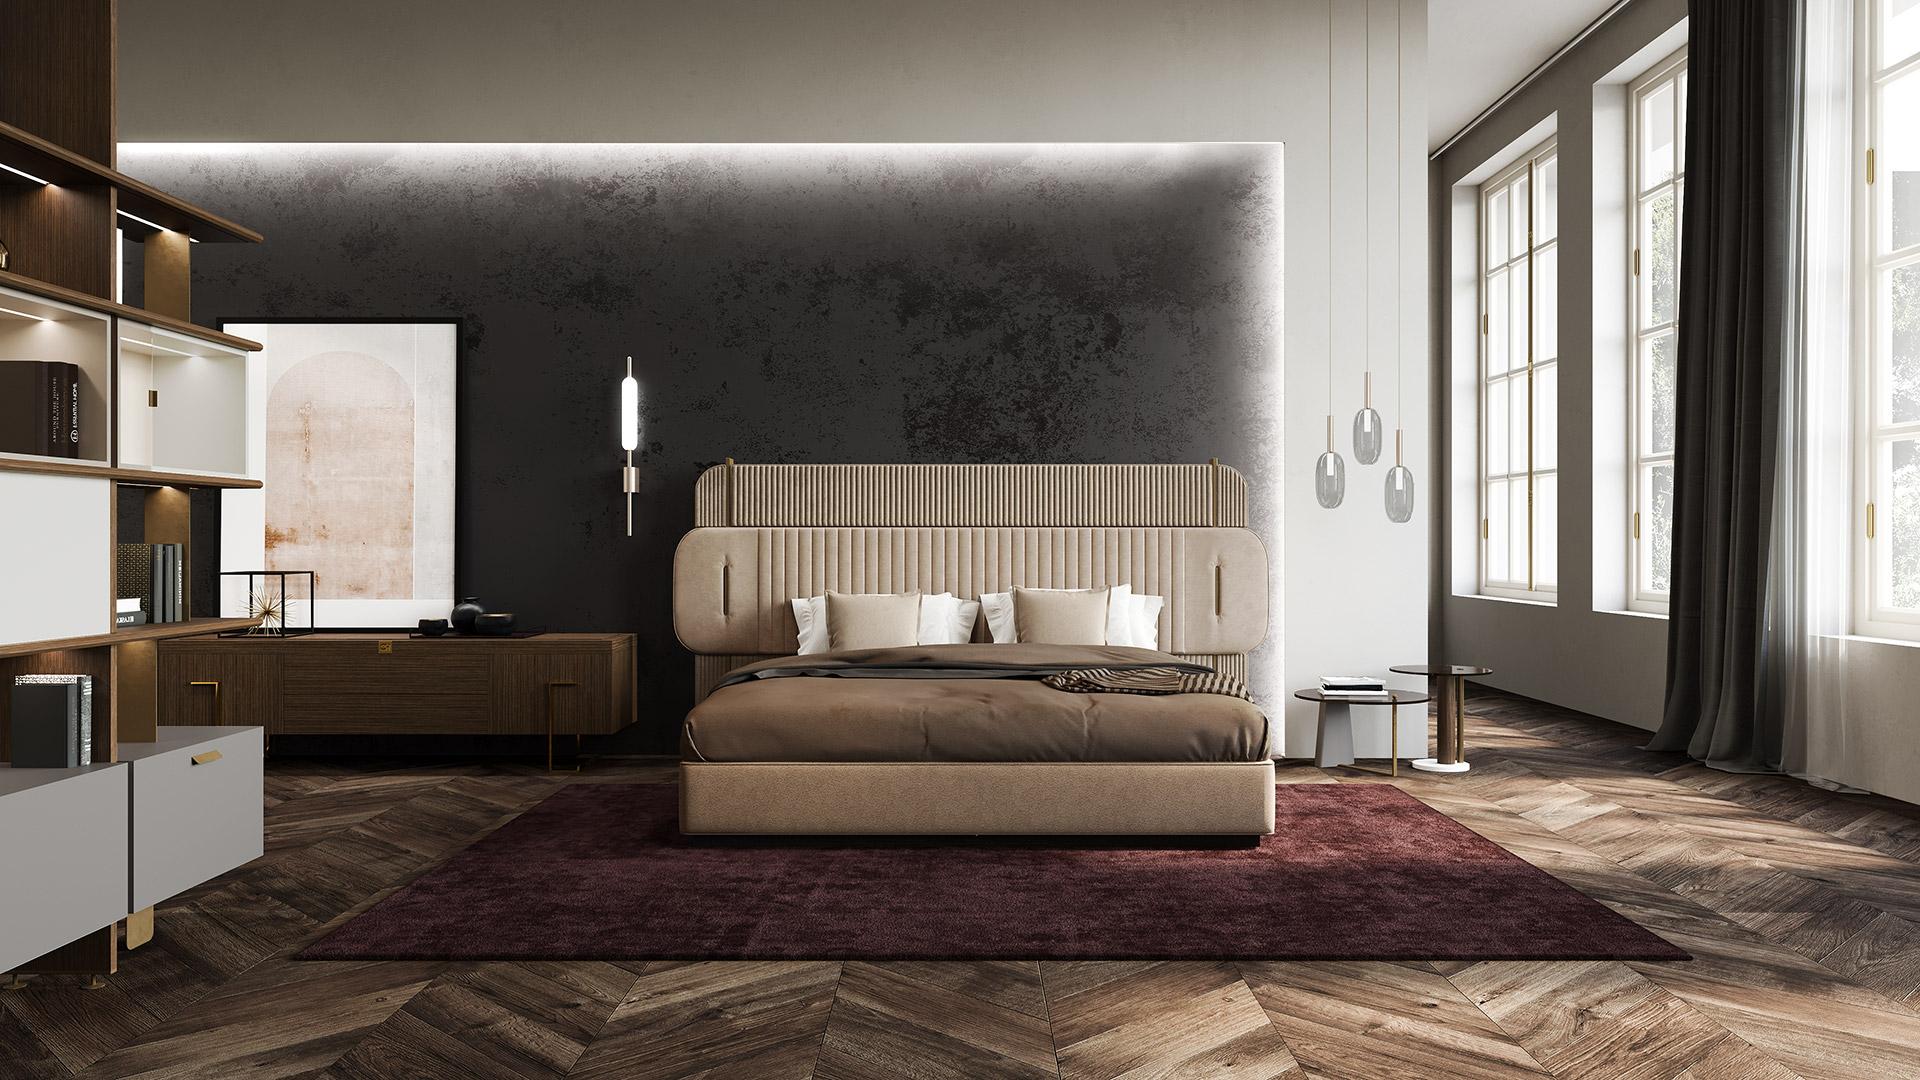 Padded bed. Mattress measures 180 x 200cm. Perfect for every luxury and Contemporary environment. Characterized by a beautiful satin brass metal details inserted in the upholstery of the headboard. Amazing pipe stitching create a sense of movement